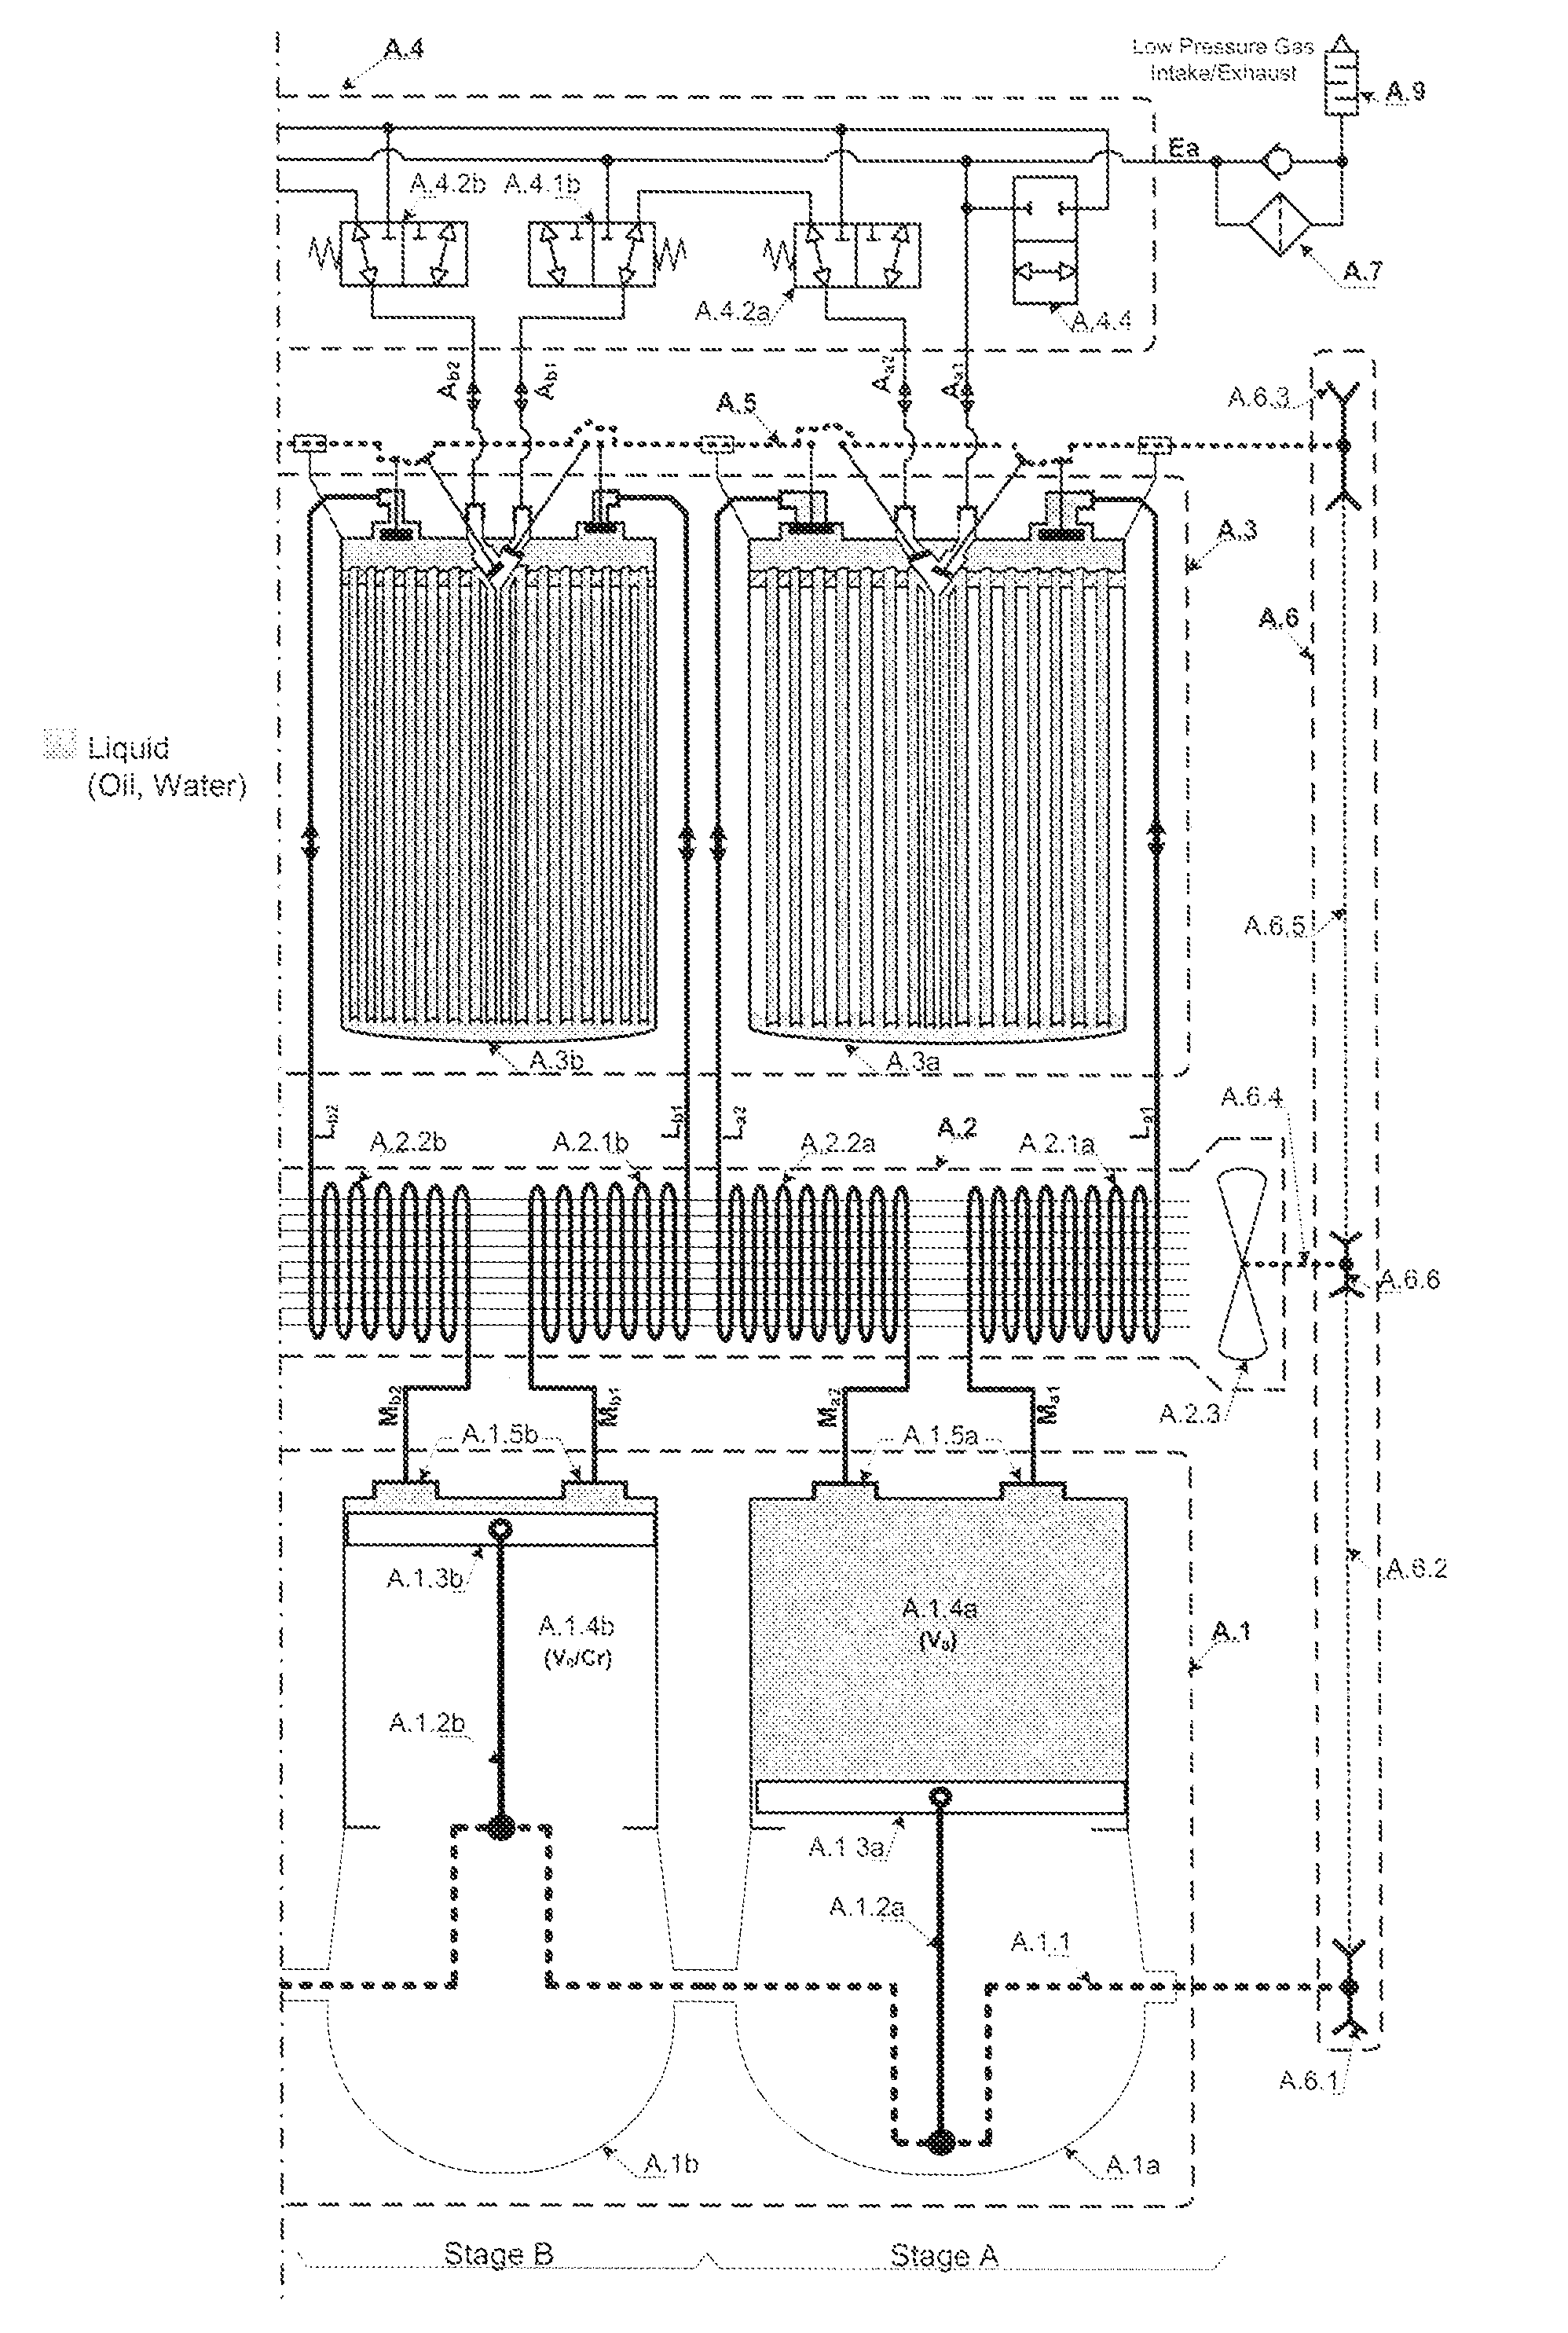 Multistage hydraulic gas compression/expansion systems and methods